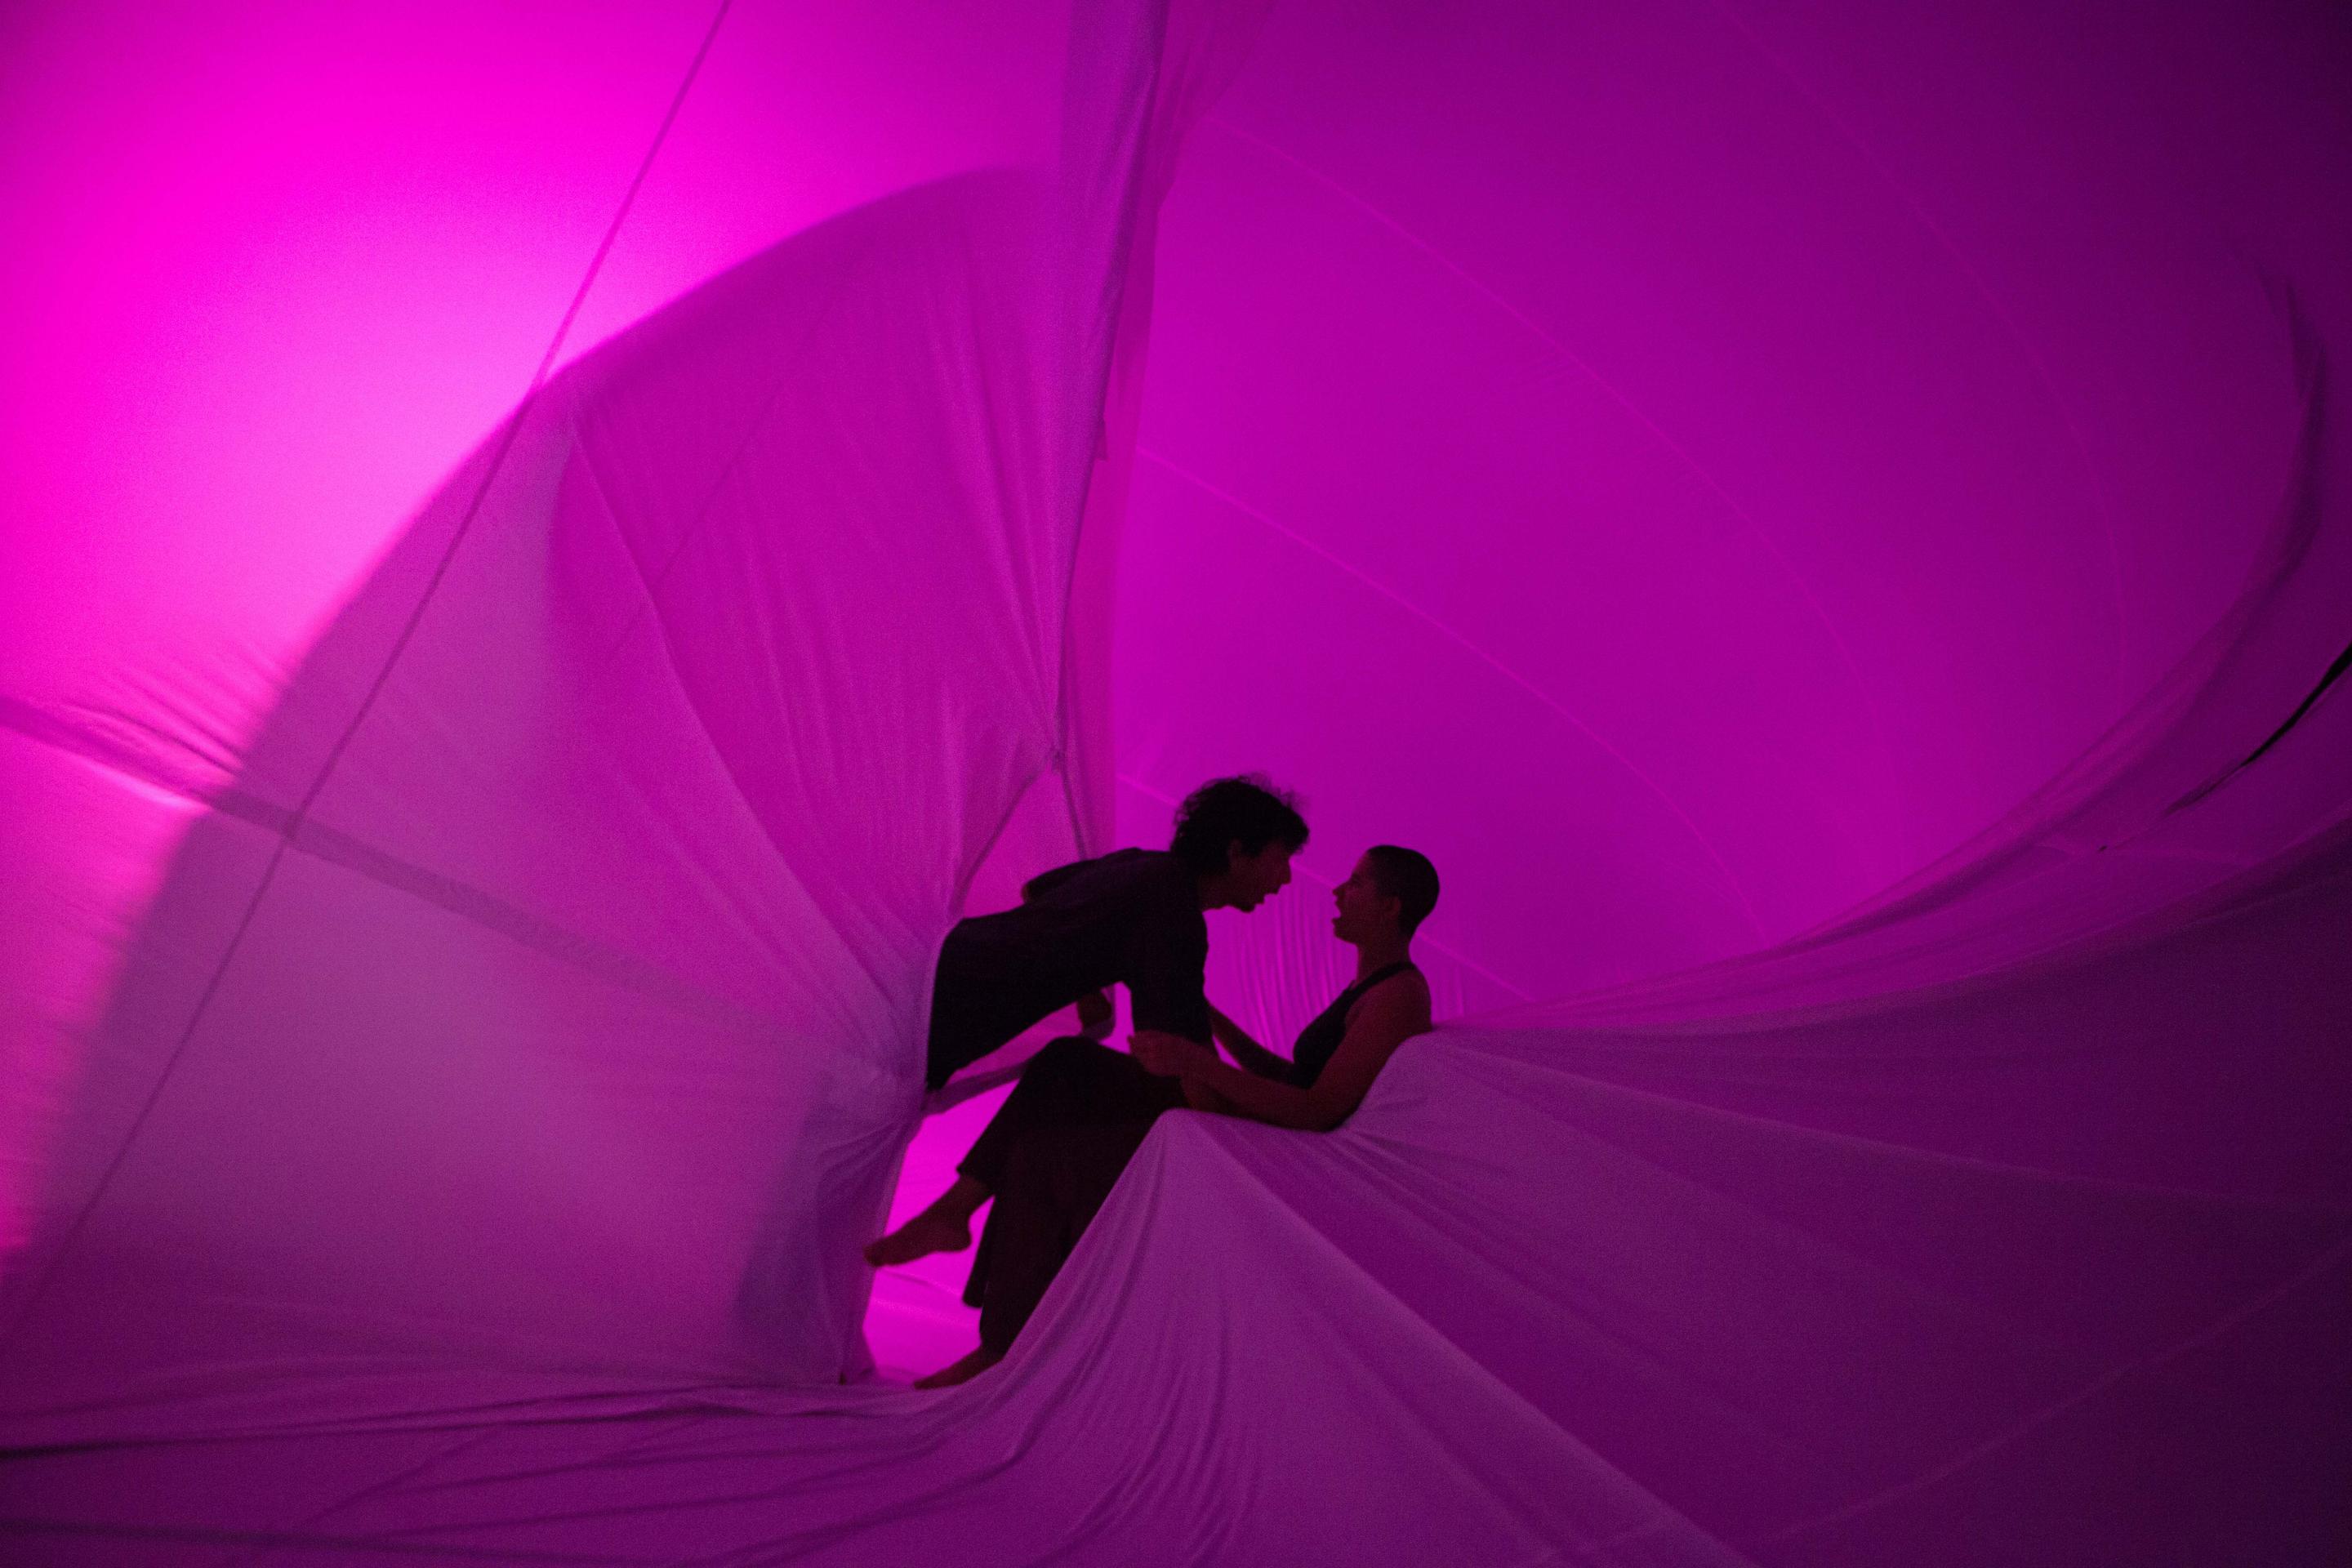 The silhouettes of two performers are pictured within an inflatable space. One is sitting, while the other leans over them carefully.